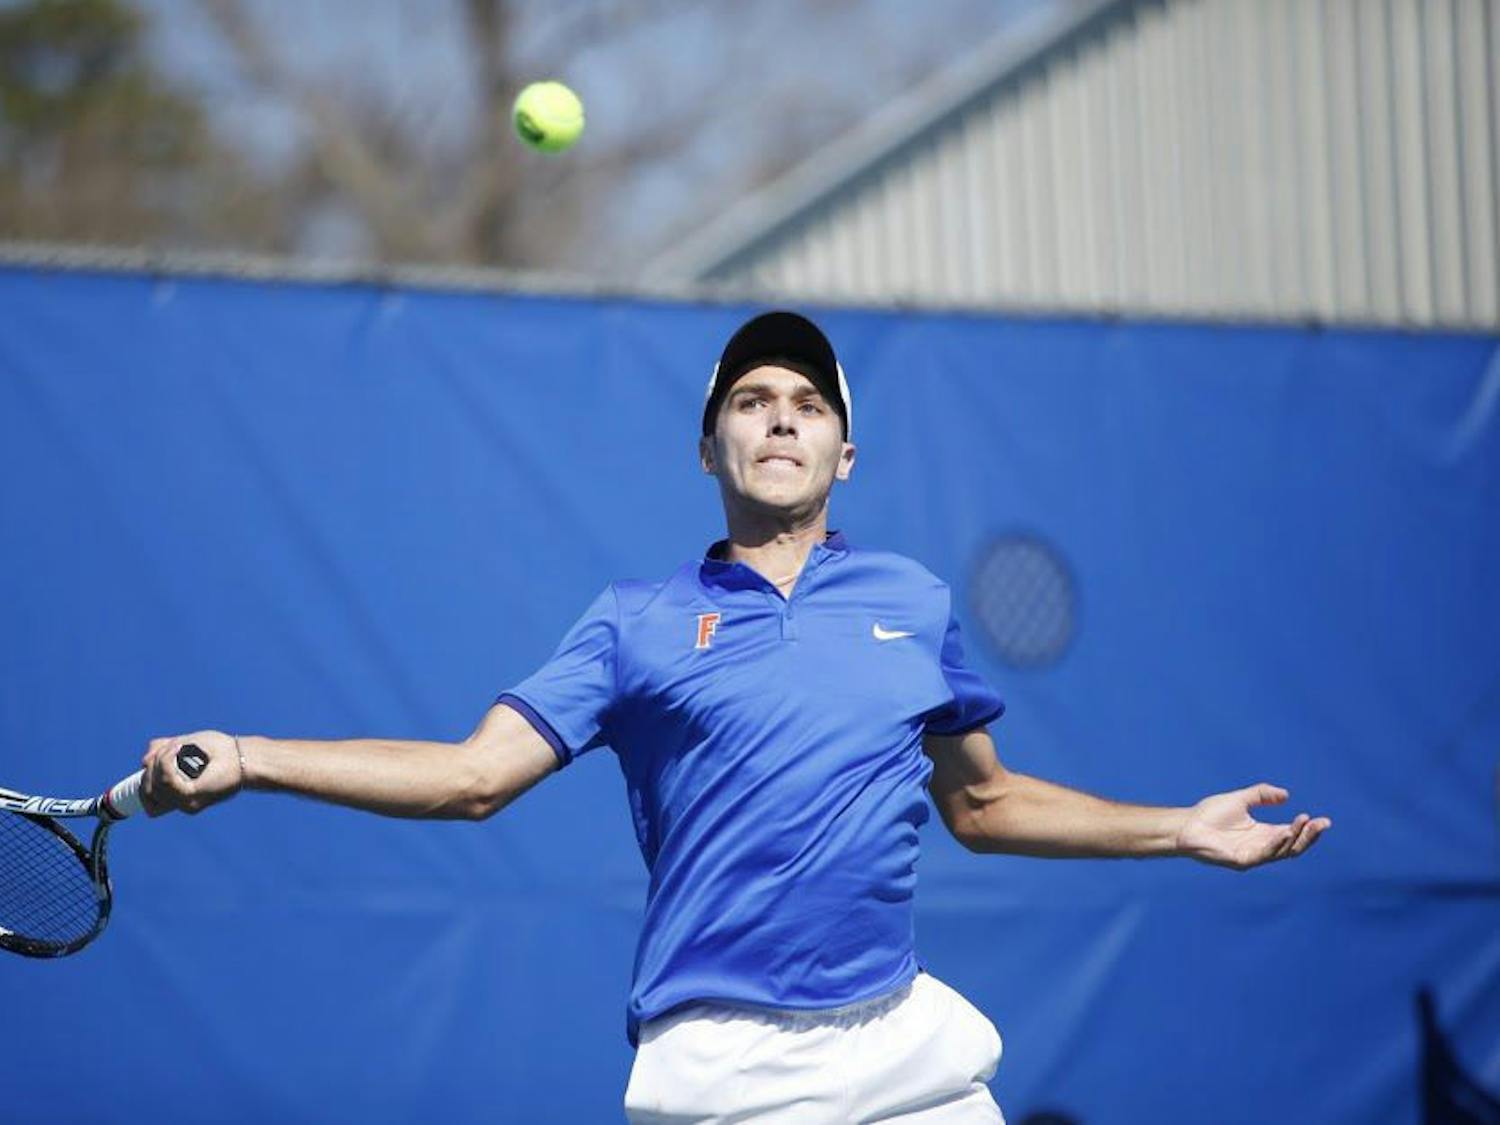 Senior Chase Perez-Blanco played the last regular-season match of his Gators career in UF's 7-0 victory over Alabama on Friday.&nbsp;“I wouldn’t change a thing,” he said. “It’s just been the best four years.”